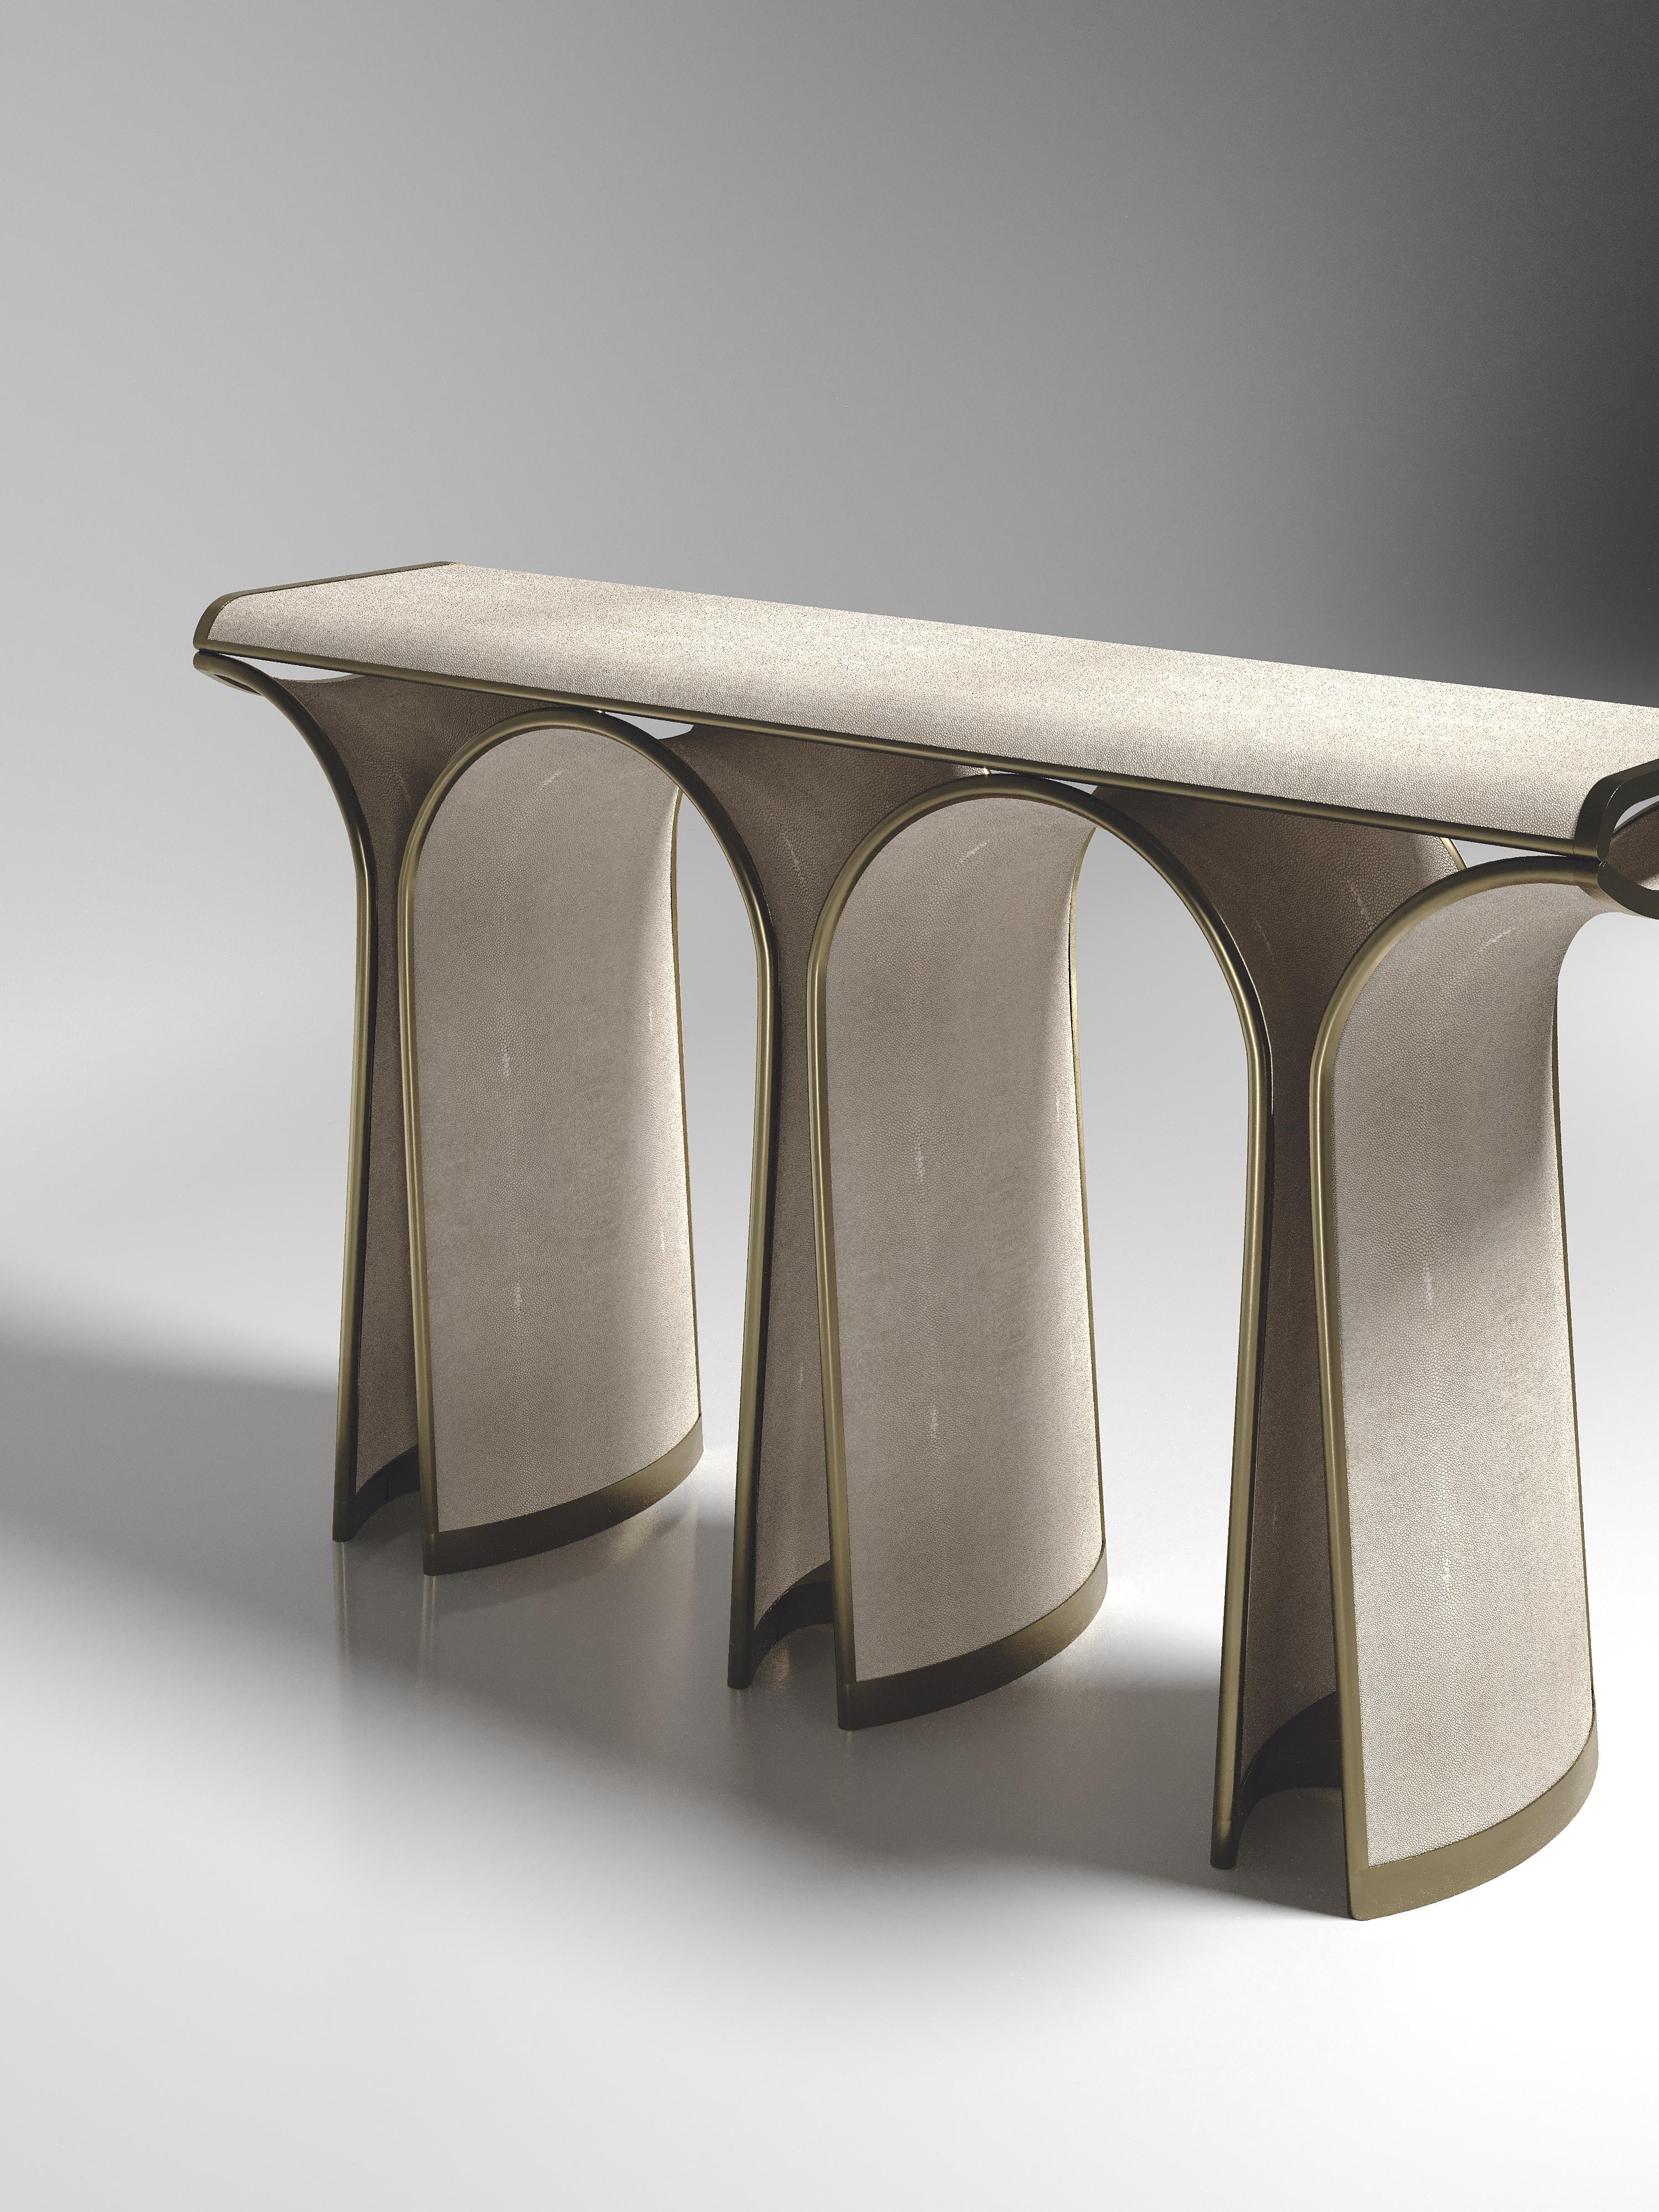 The Nymphea console by R&Y Augousti in cream shagreen with bronze-patina brass details explores the brand's iconic DNA of bringing old world artisanal craft into a contemporary and utterly luxury feel. Available in other finishes. Part of the